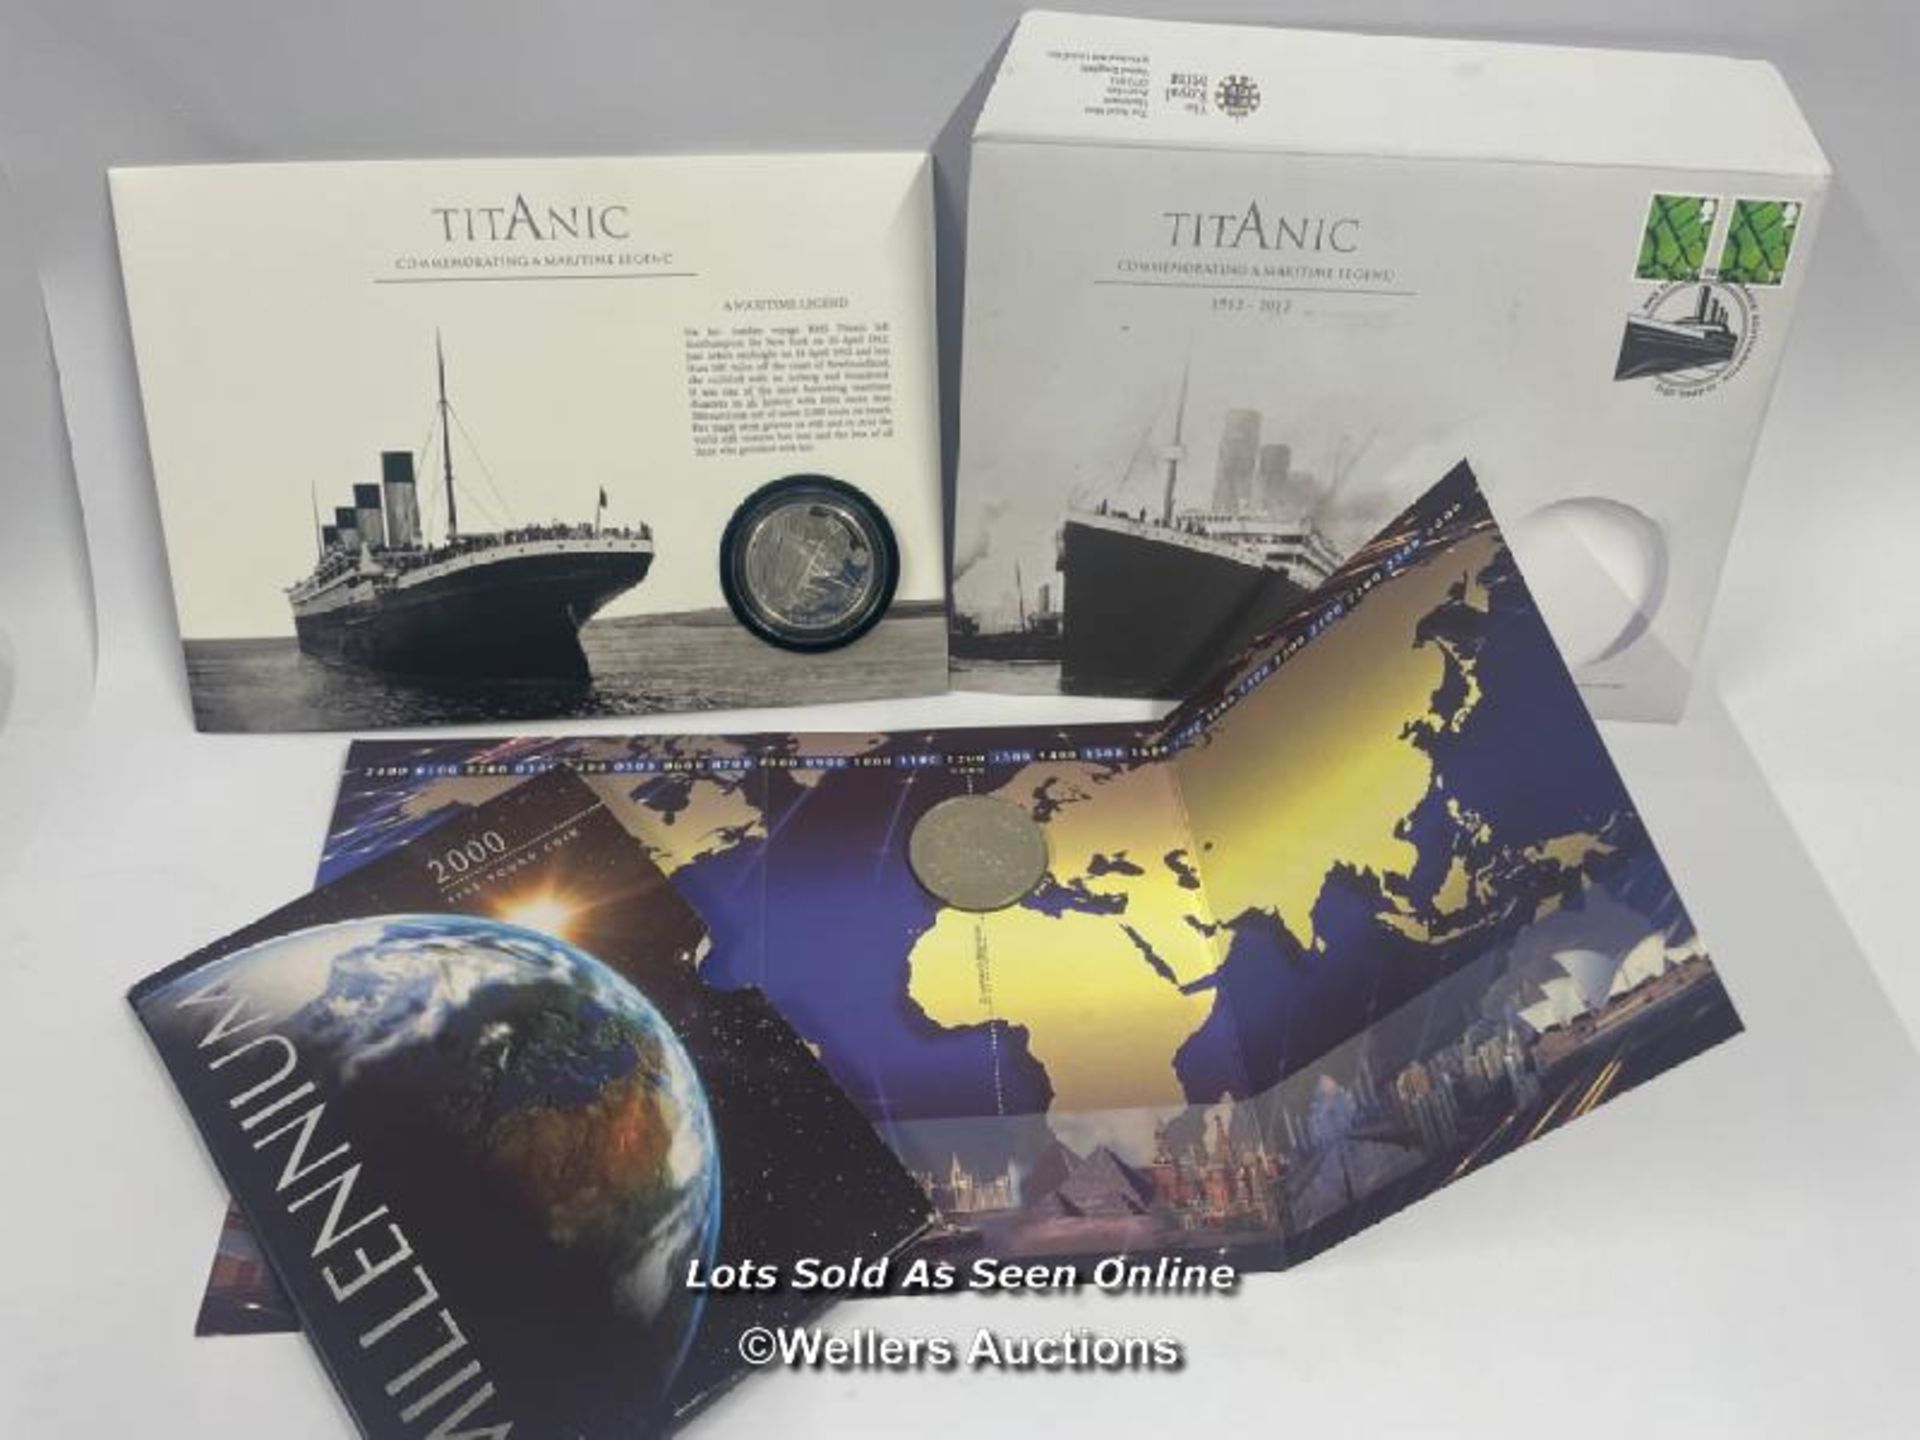 THE ROYAL MINT TITANIC SILVER PROOF £5 COIN NO.0642 AND ROYAL MINT MILLENIUM £5 COIN